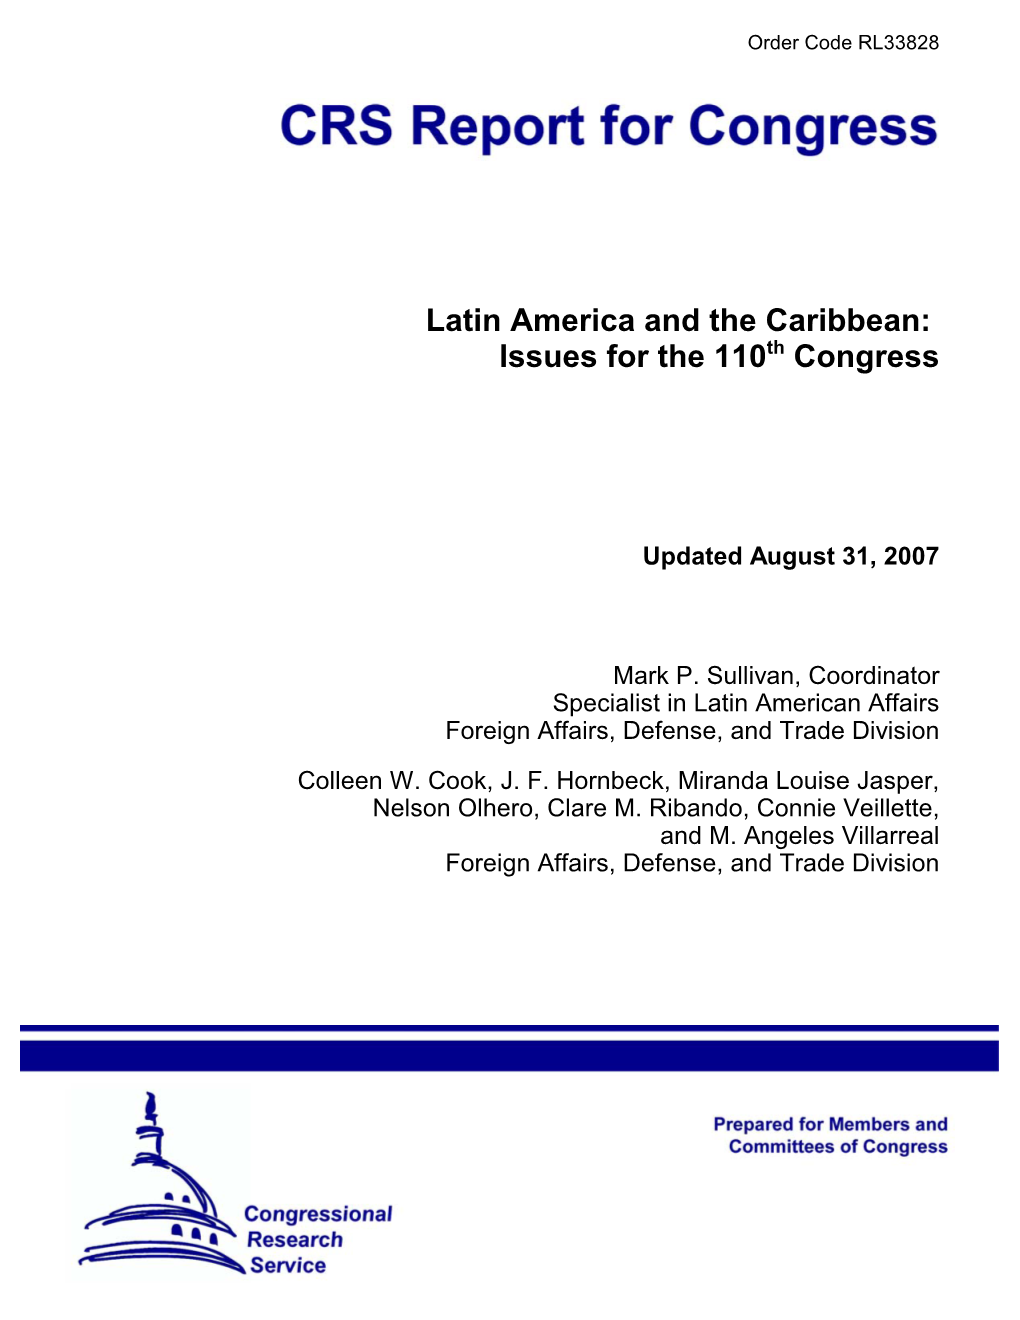 Latin America and the Caribbean: Issues for the 110Th Congress